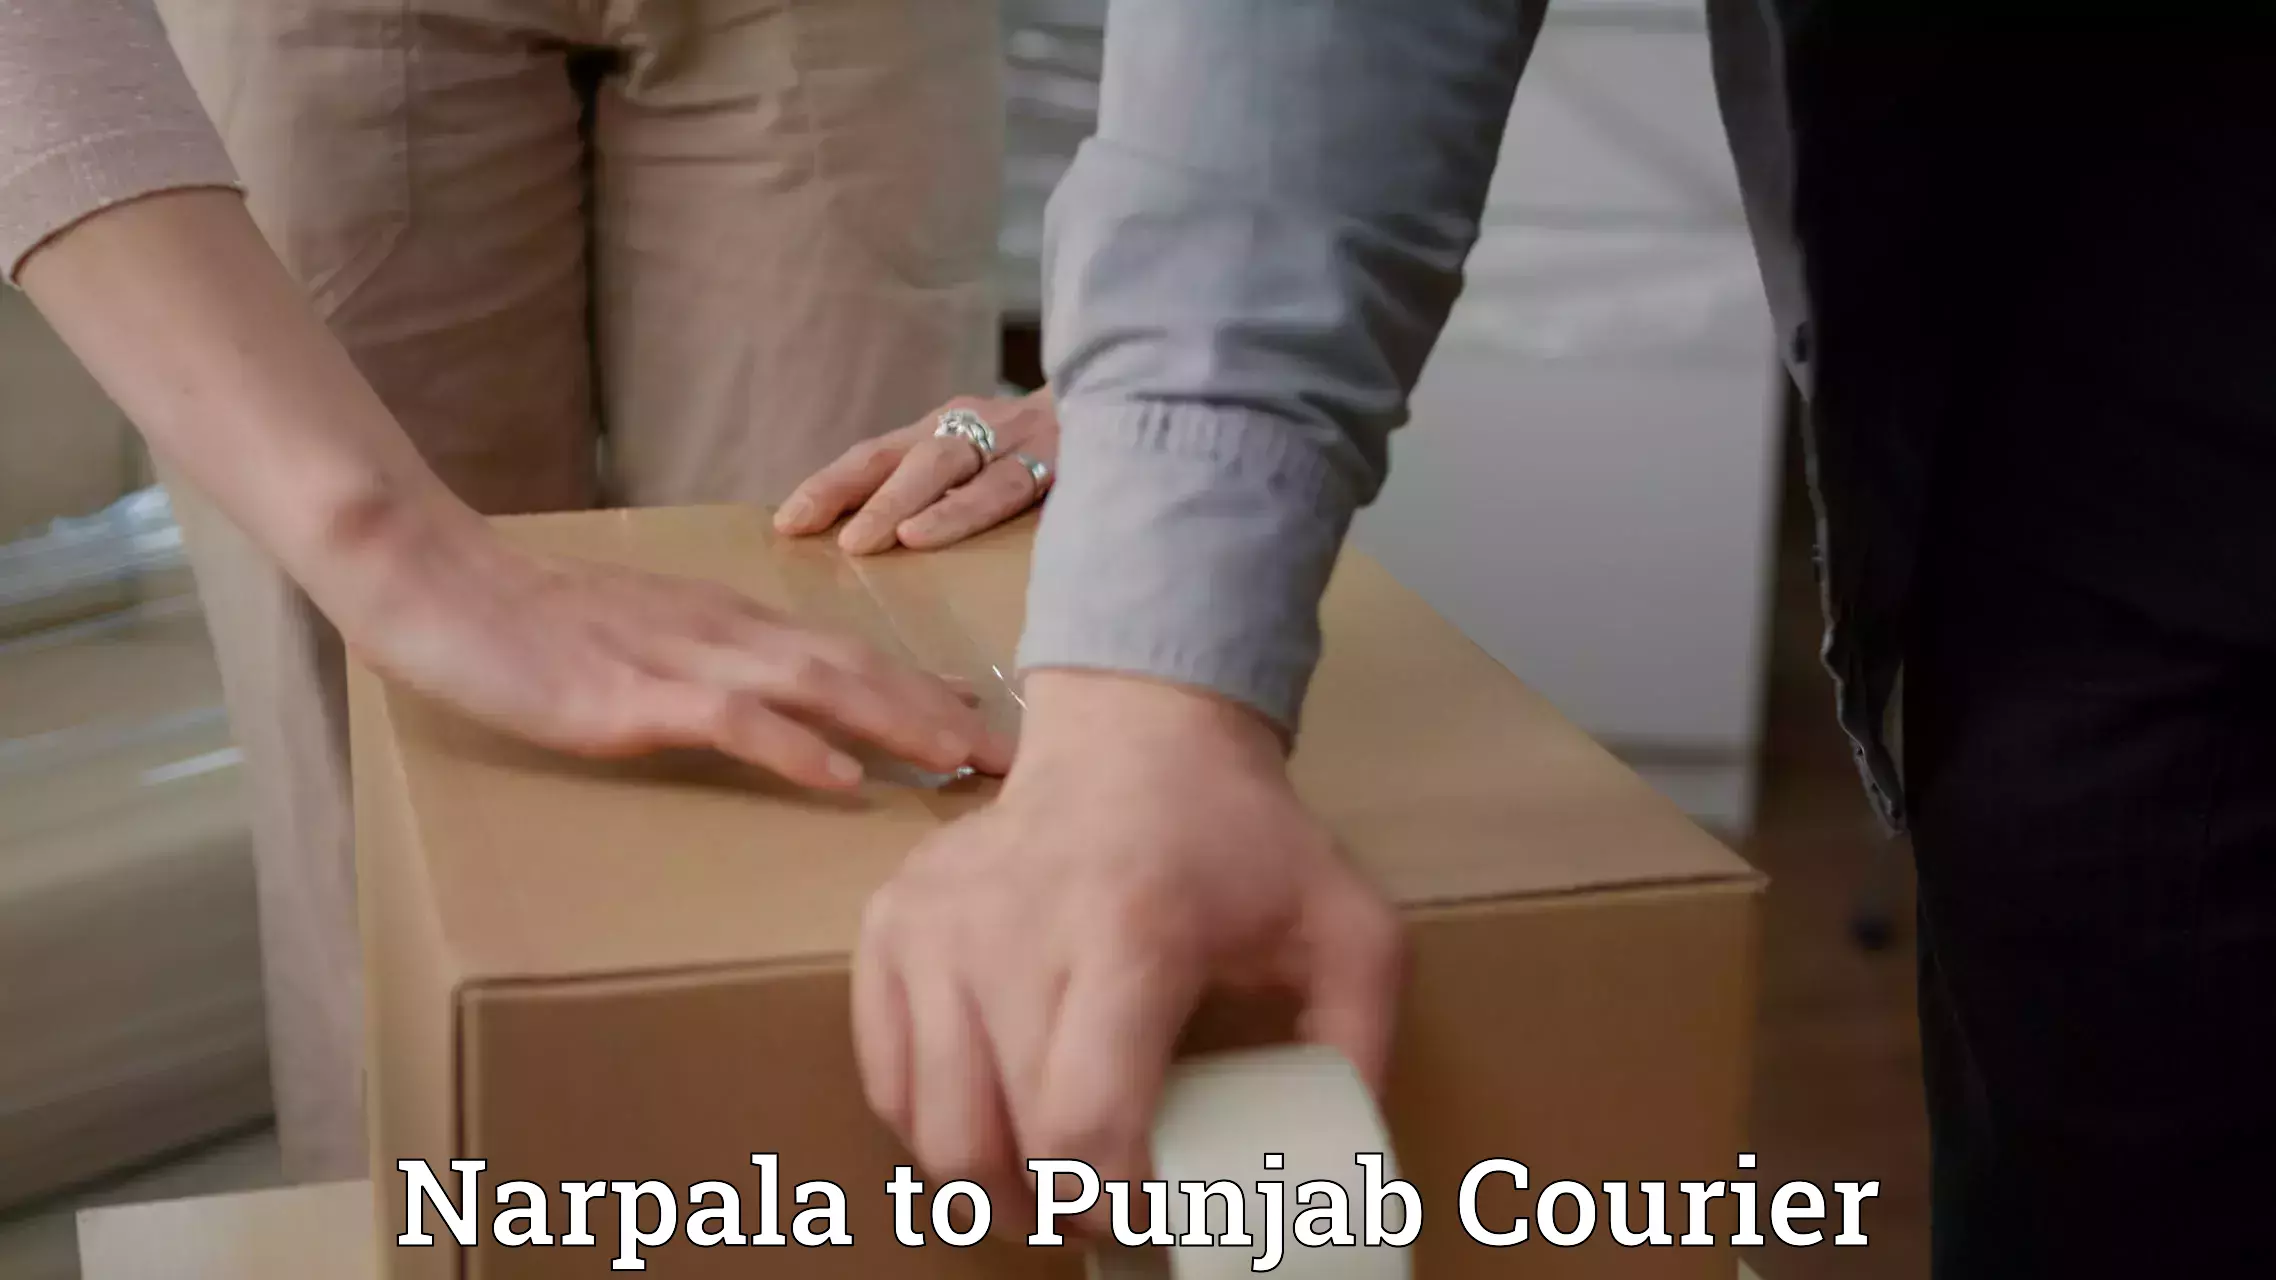 Bulk courier orders Narpala to Mehta Chowk